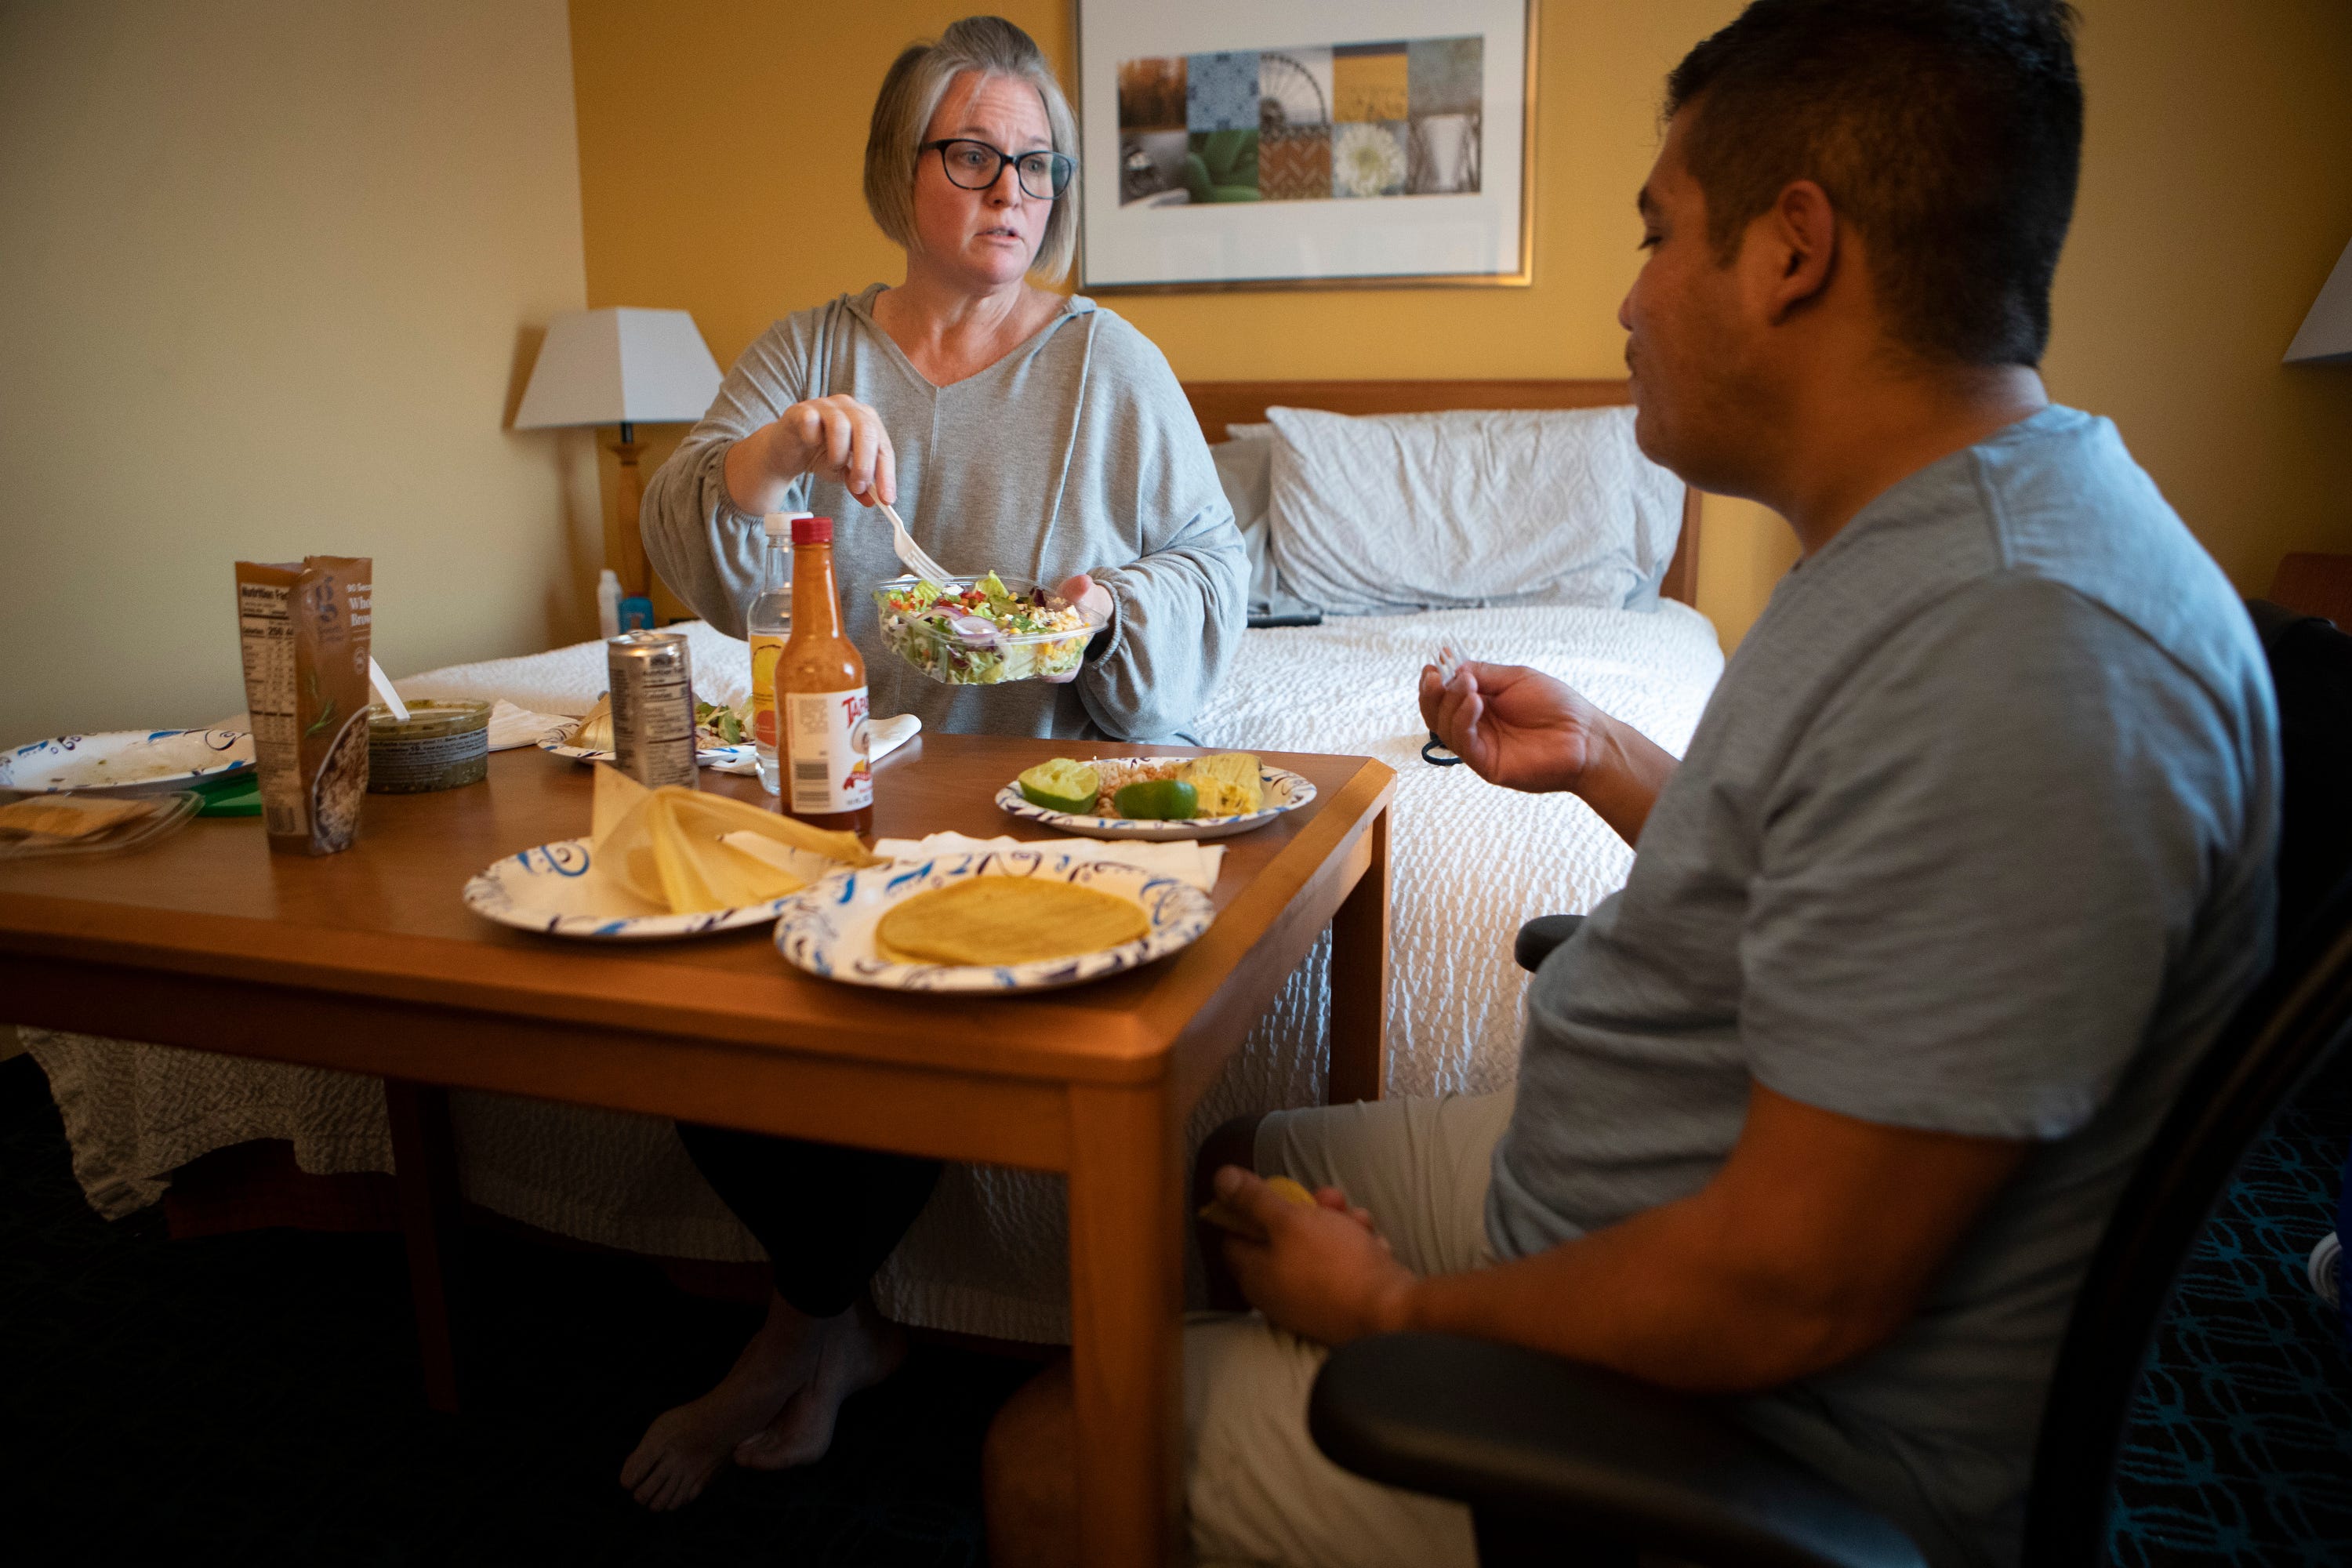 Evacuees from the El Dorado Fire, Malissa and Joaquin Lopez, eat dinner inside the San Bernardino, Calif., hotel they've been staying in for two weeks on September 22, 2020. The couple had just bought a new home in the Angelus Oaks area only four weeks before the fire broke out.